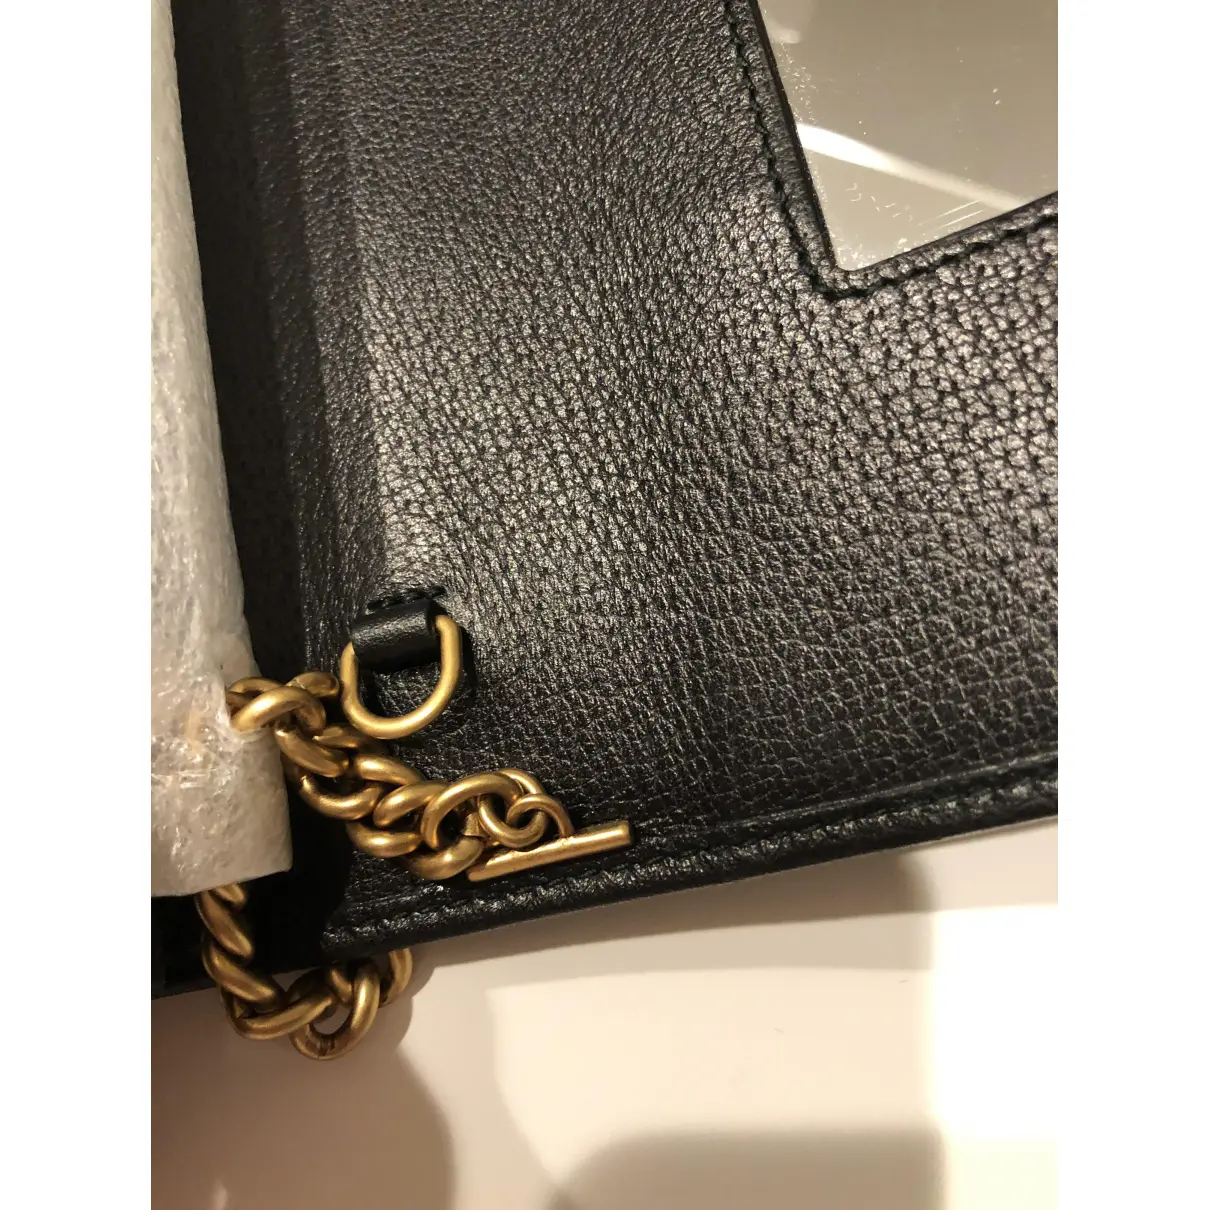 Buy Gucci GG Marmont Chain Wallet Strass leather crossbody bag online